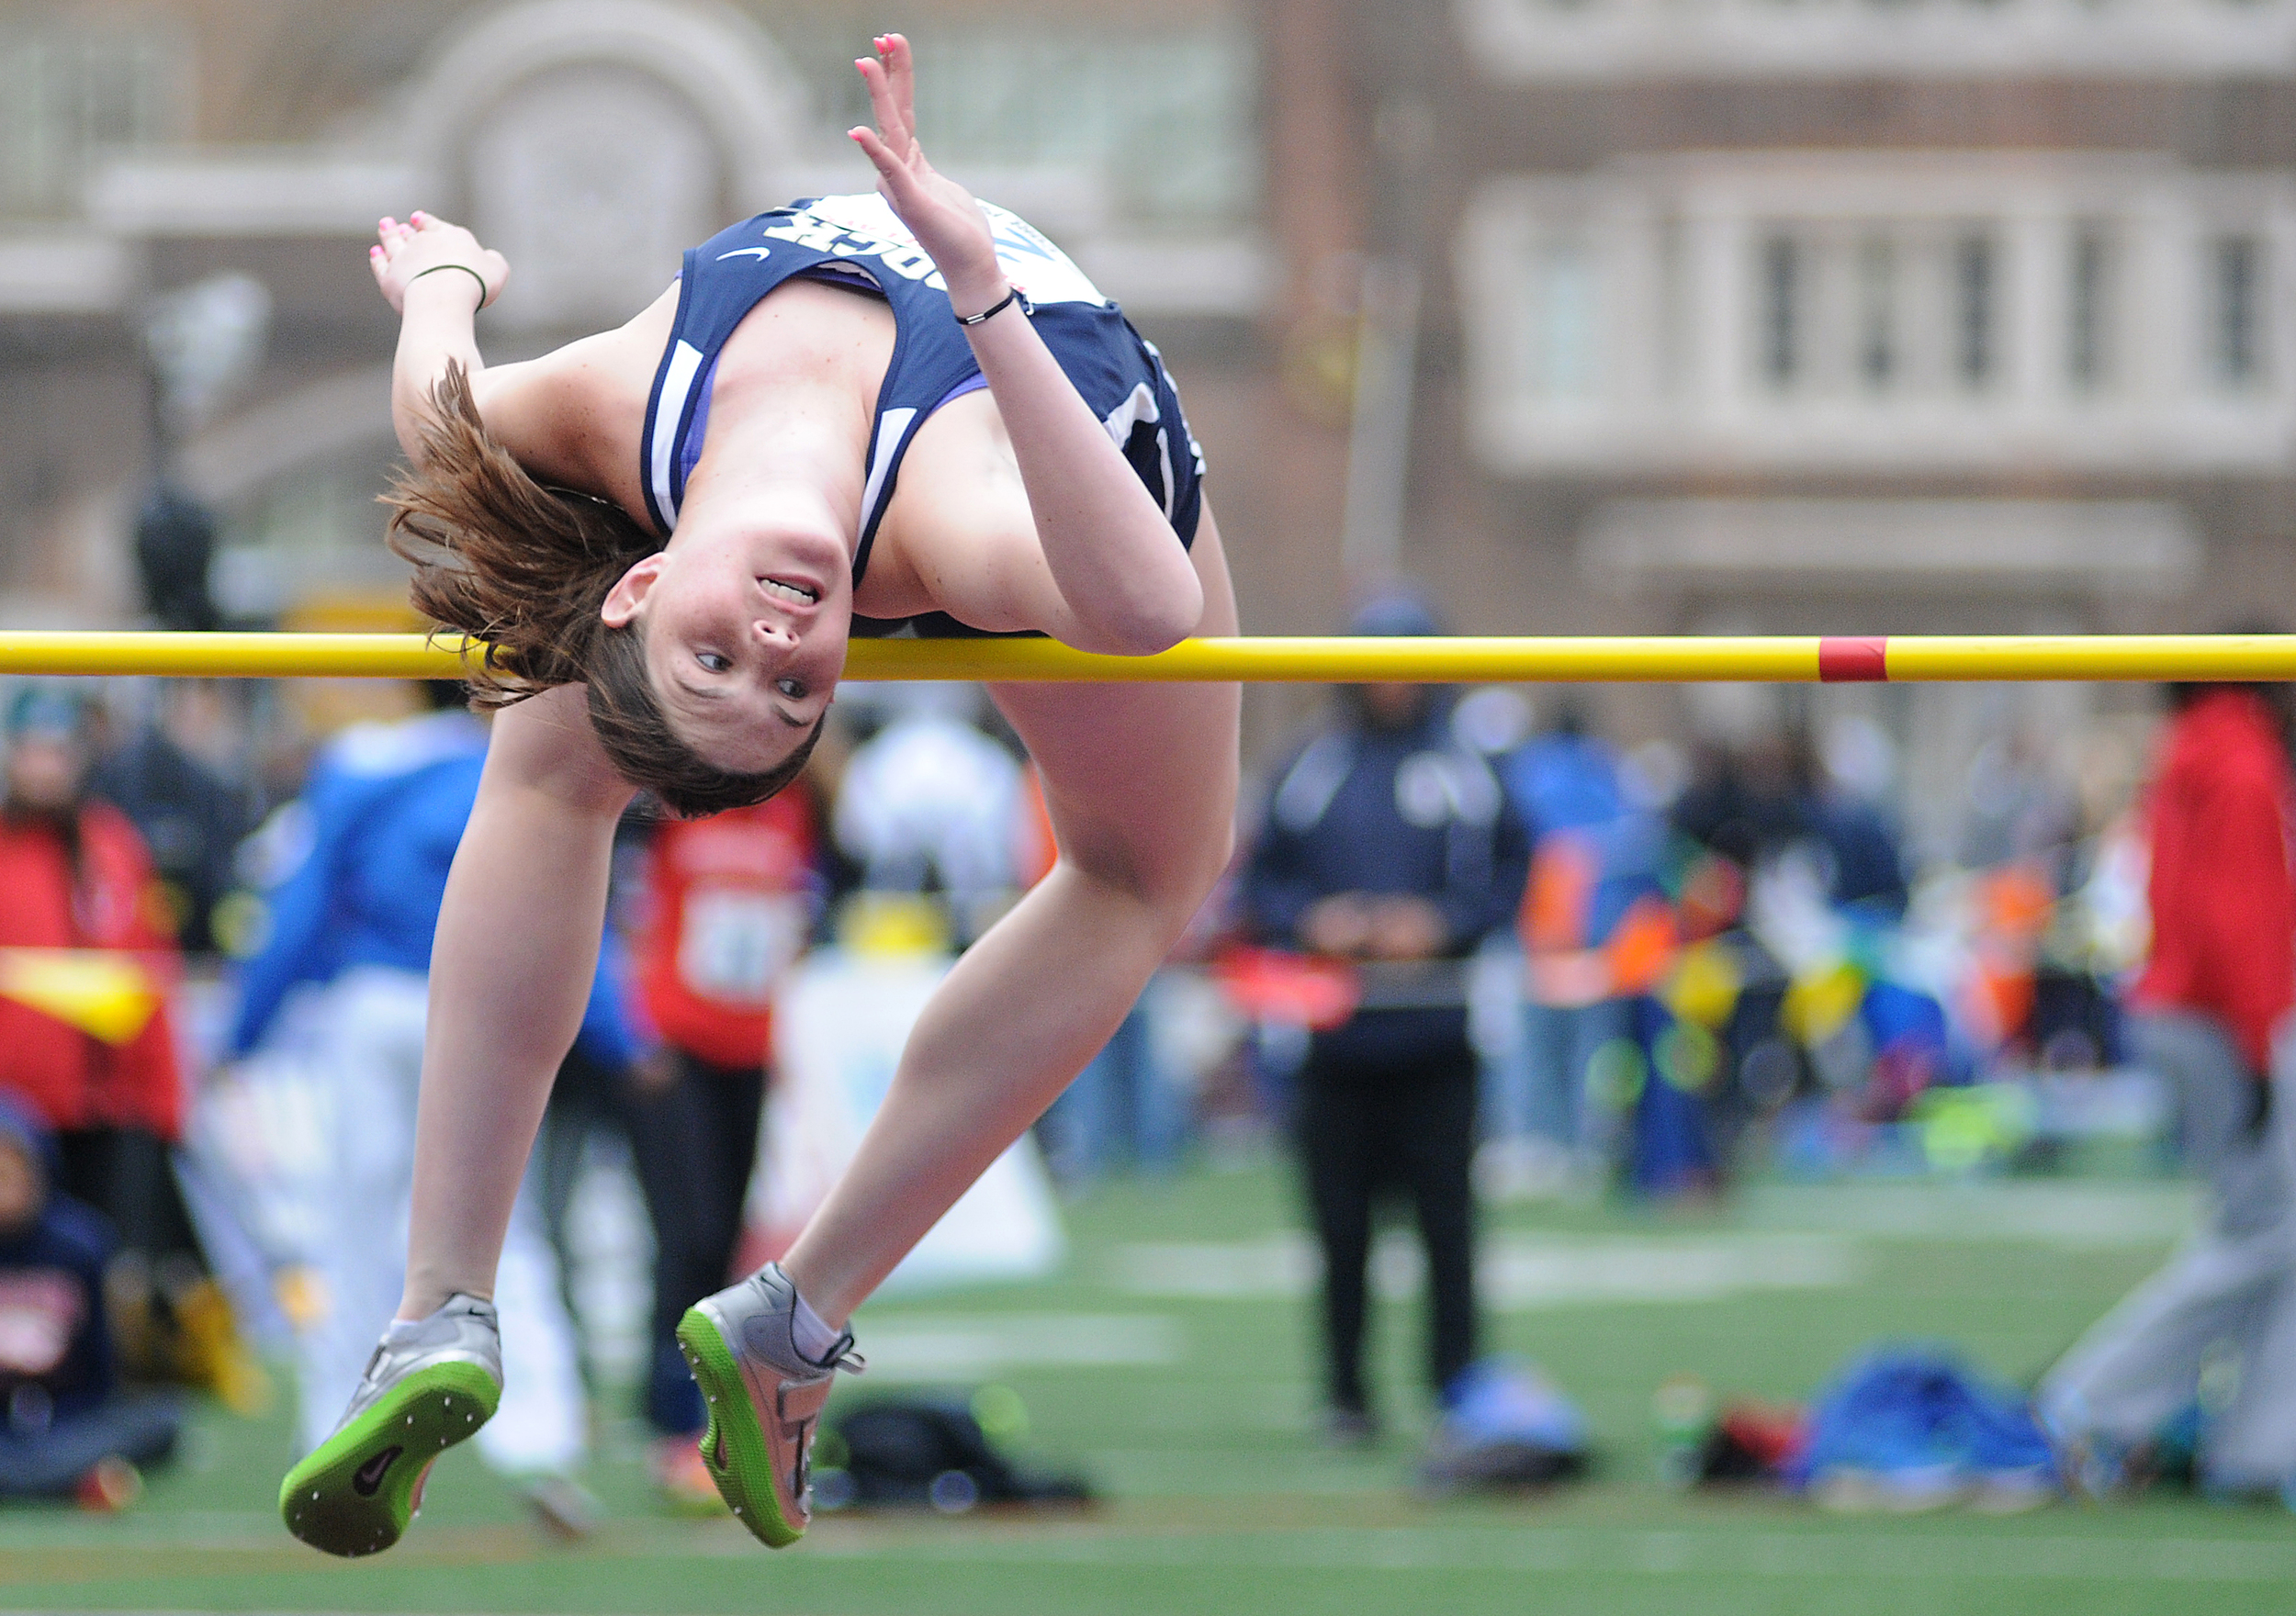  Council Rock South's Shannon Taub participates in the high jump championship during the opening day of the Penn Relays at the University of Pennsylvania's Franklin Field in Philadelphia. 